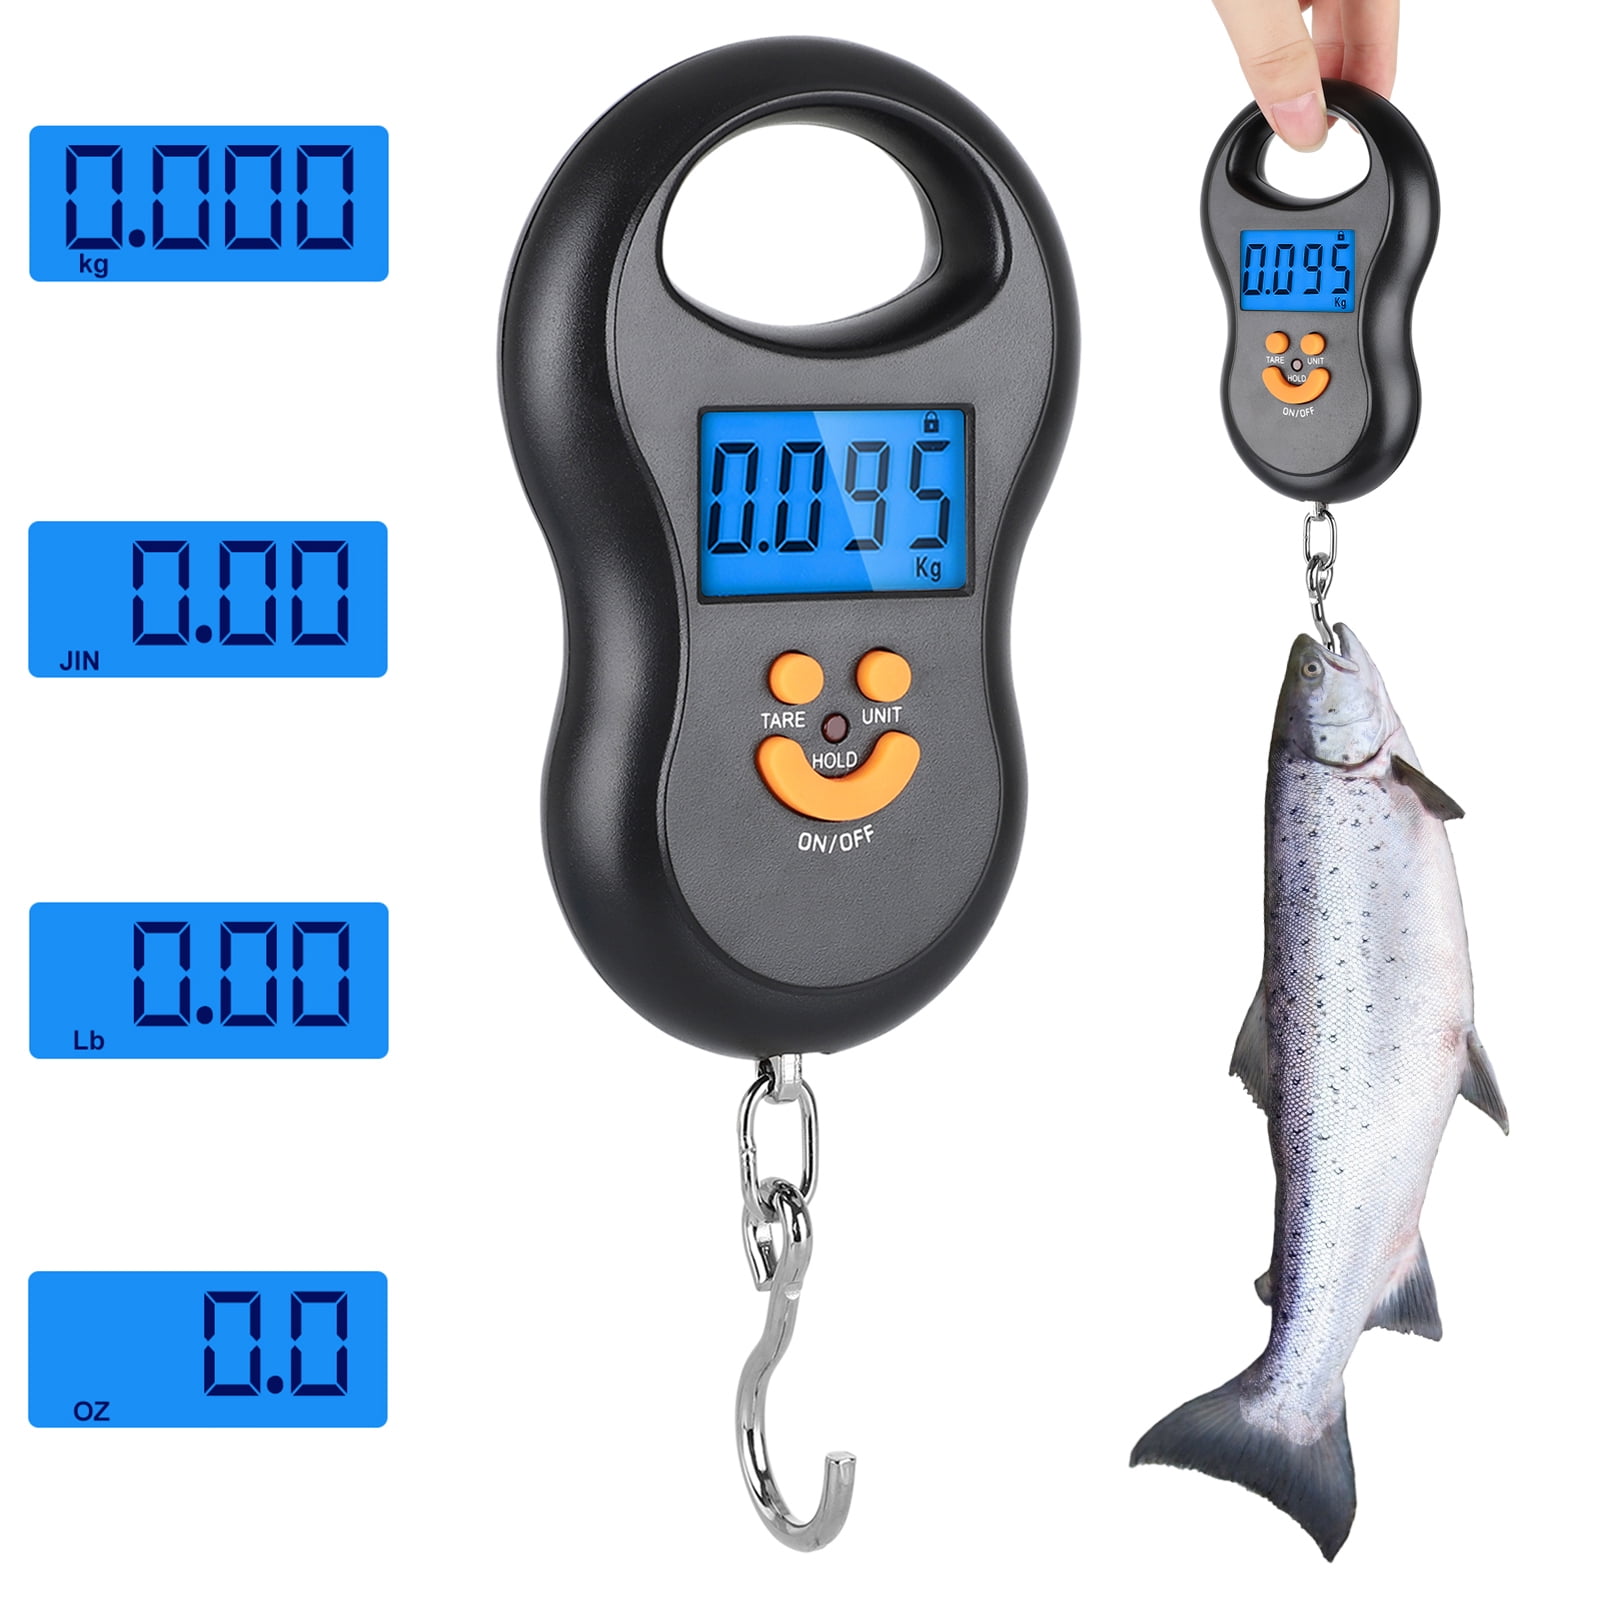 50kg x 10g Digital Electronic Hanging Hook Scale with Batteries and Carry Pouch Included Fishing Scale with Backlit LCD Display Non-Slip Handle 